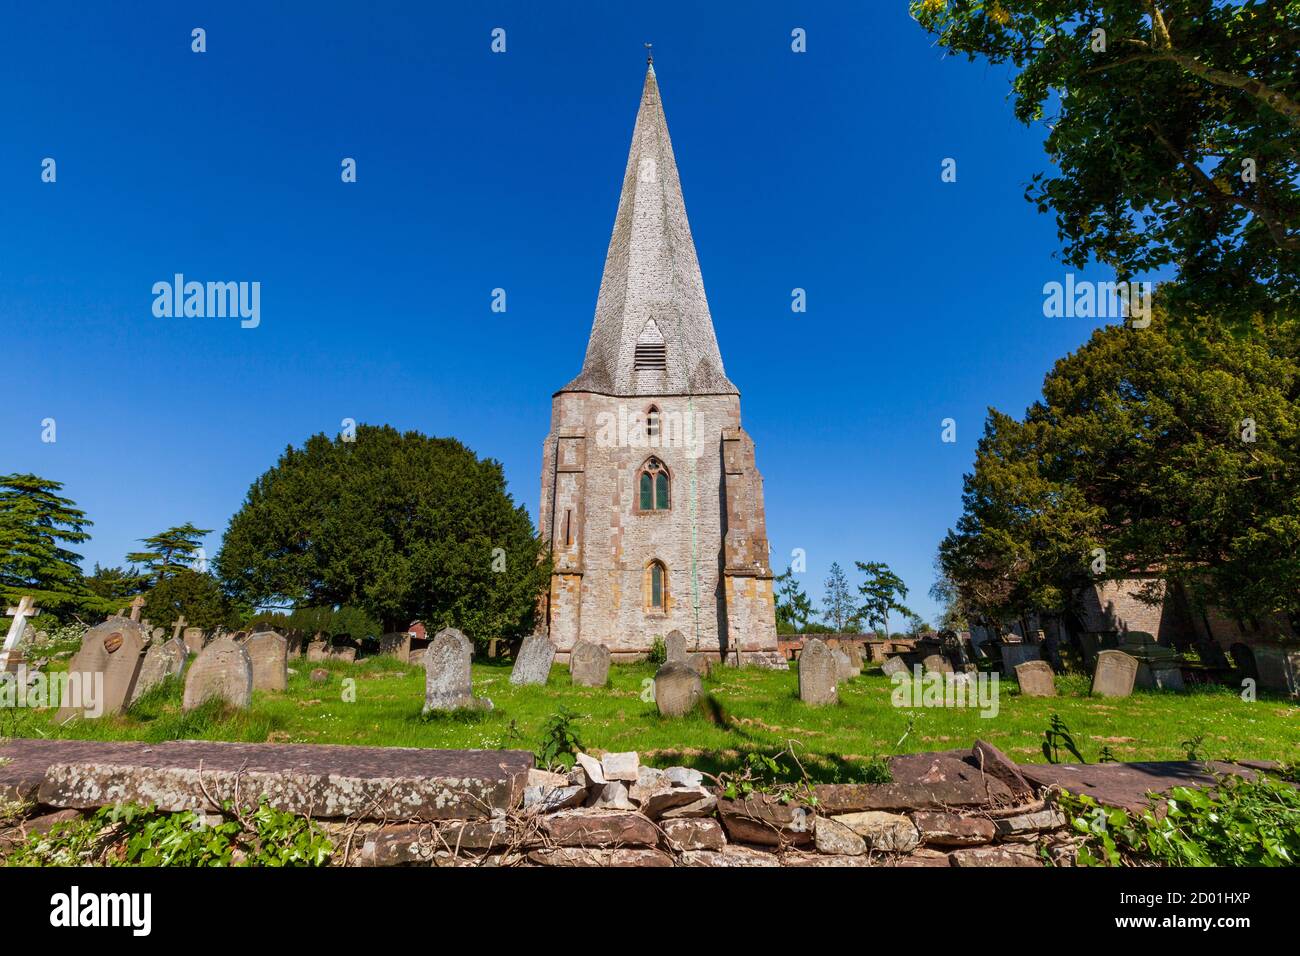 The church of St Mary, St Peter and St Paul at Westbury-on-Severn, Gloucestershire, England Stock Photo